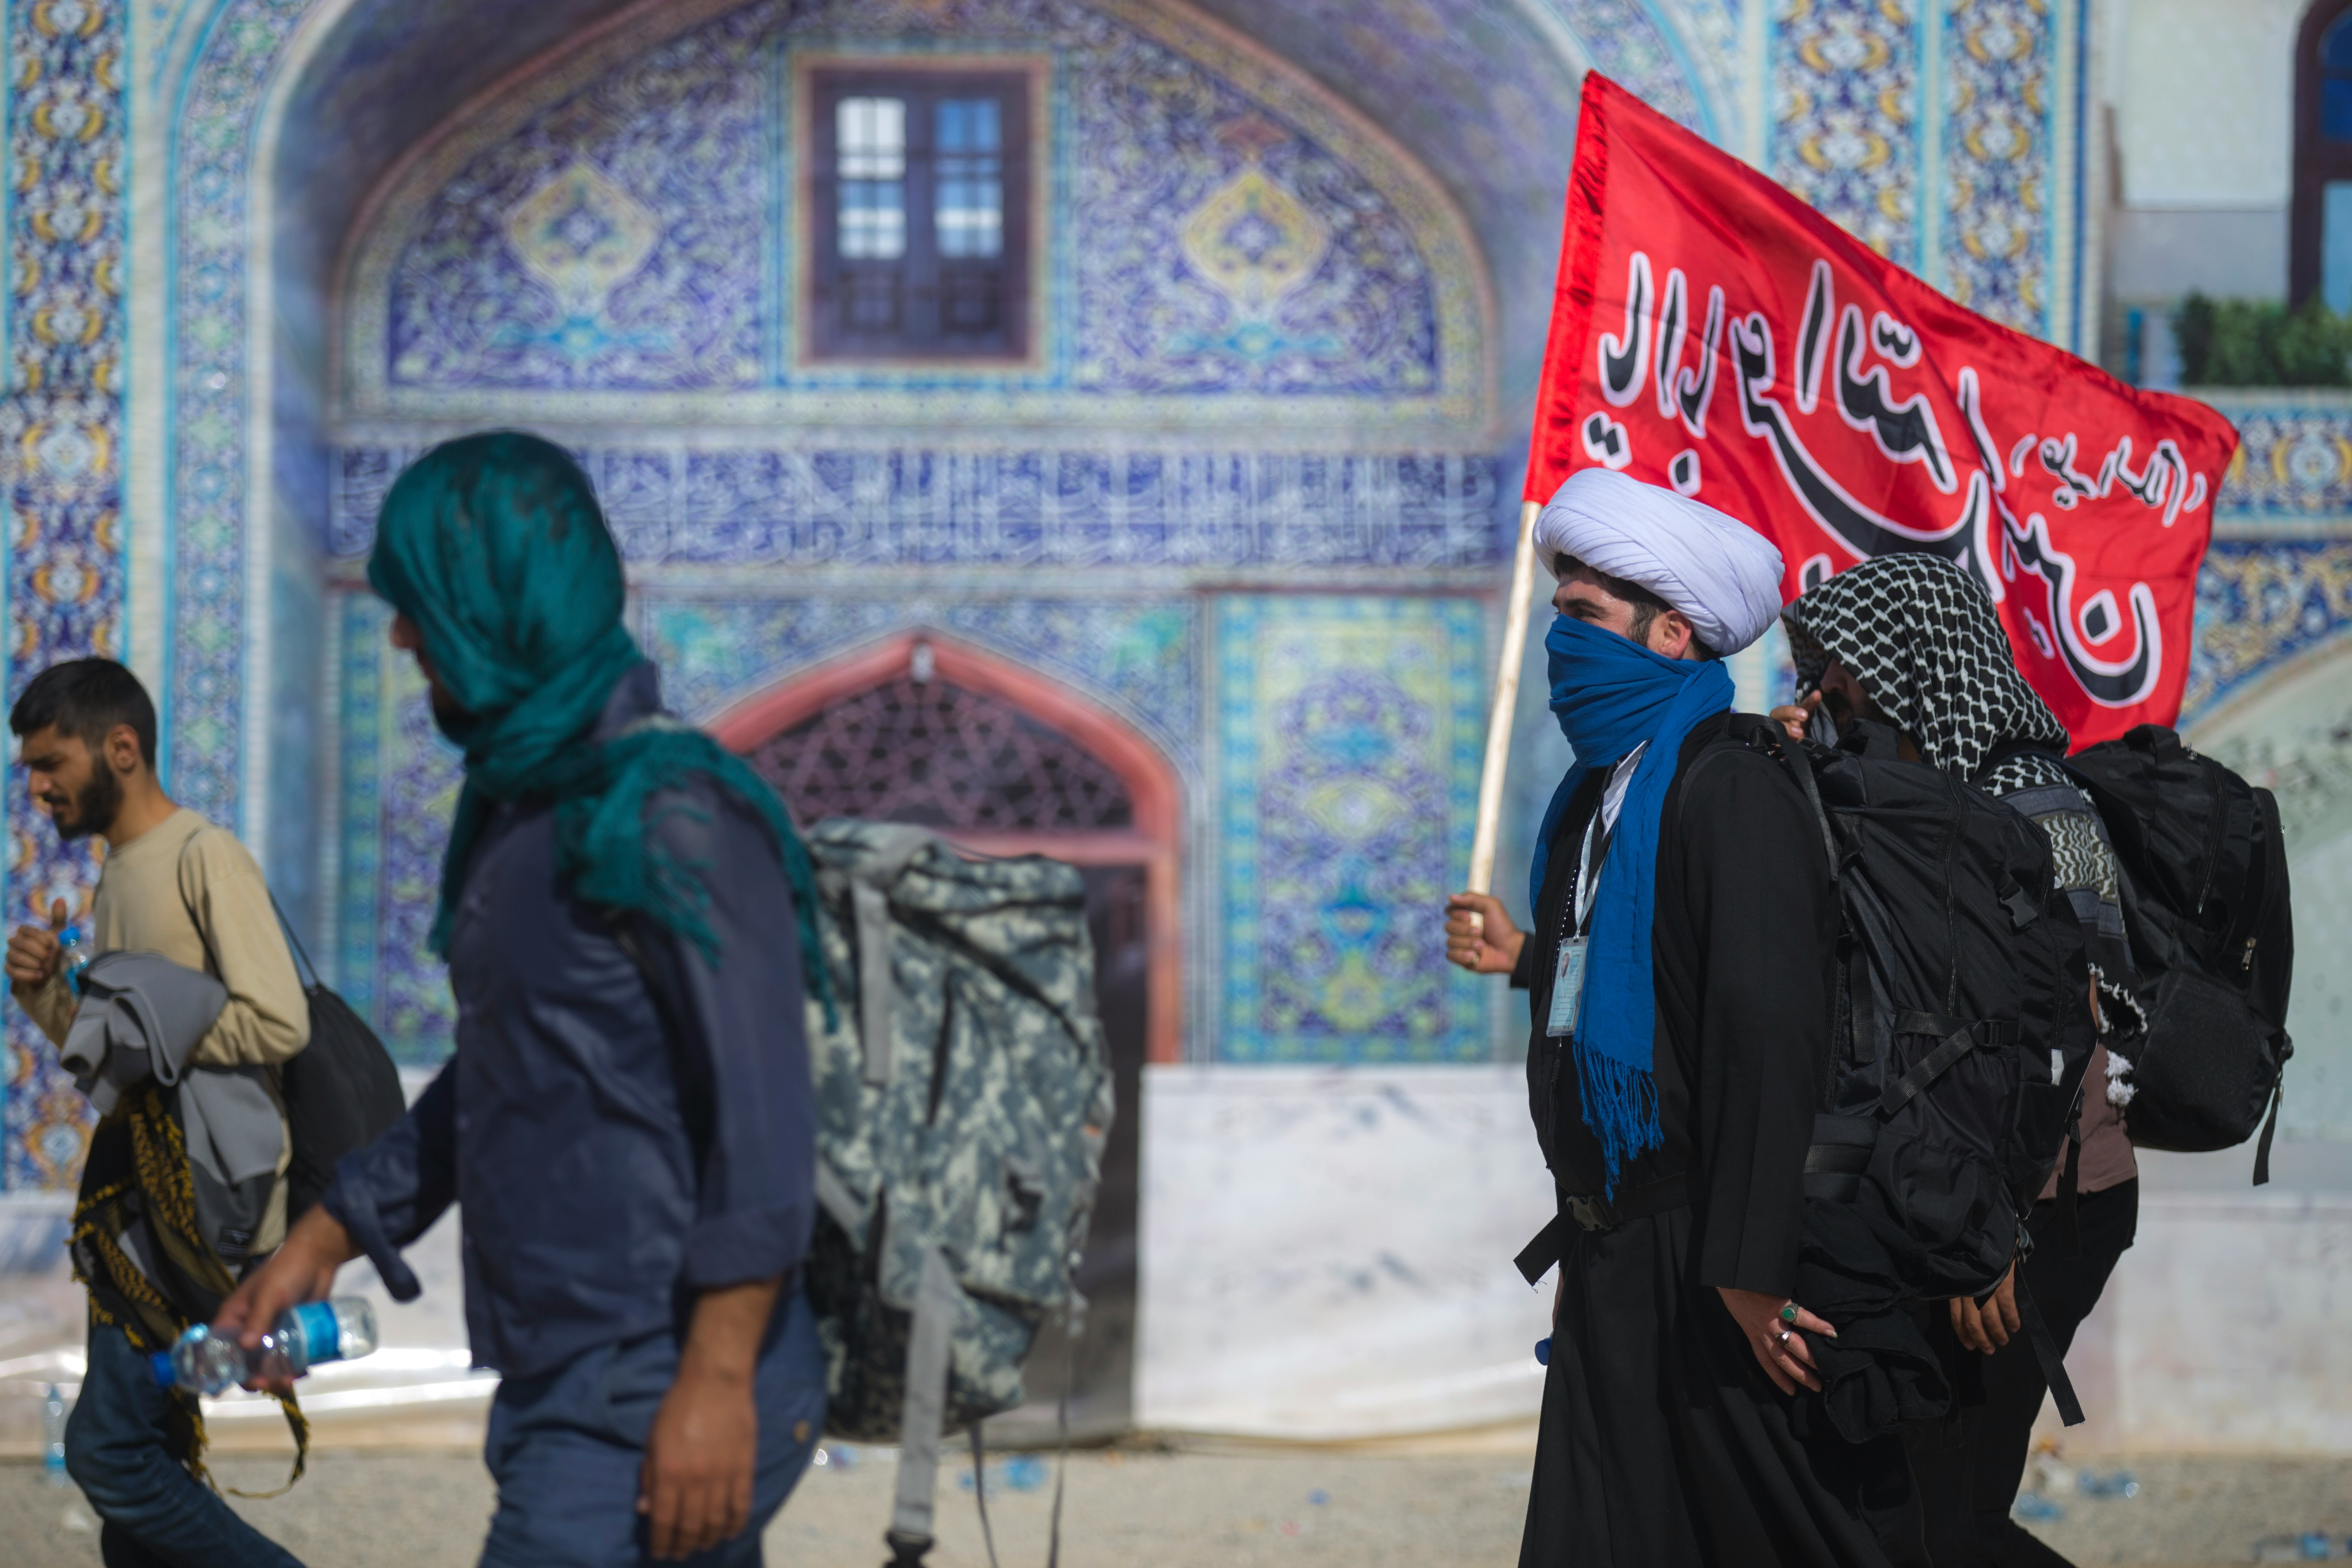 An akhoond  is a Persian title for an Islamic cleric, common in Iran, Azerbaijan and some parts of Afghanistan and Pakistan. The Standard Chinese word for imam used in particular by the Hui people, also derives from this term.
(Arbaeen Pilgrimage- Mehran City, Iran)